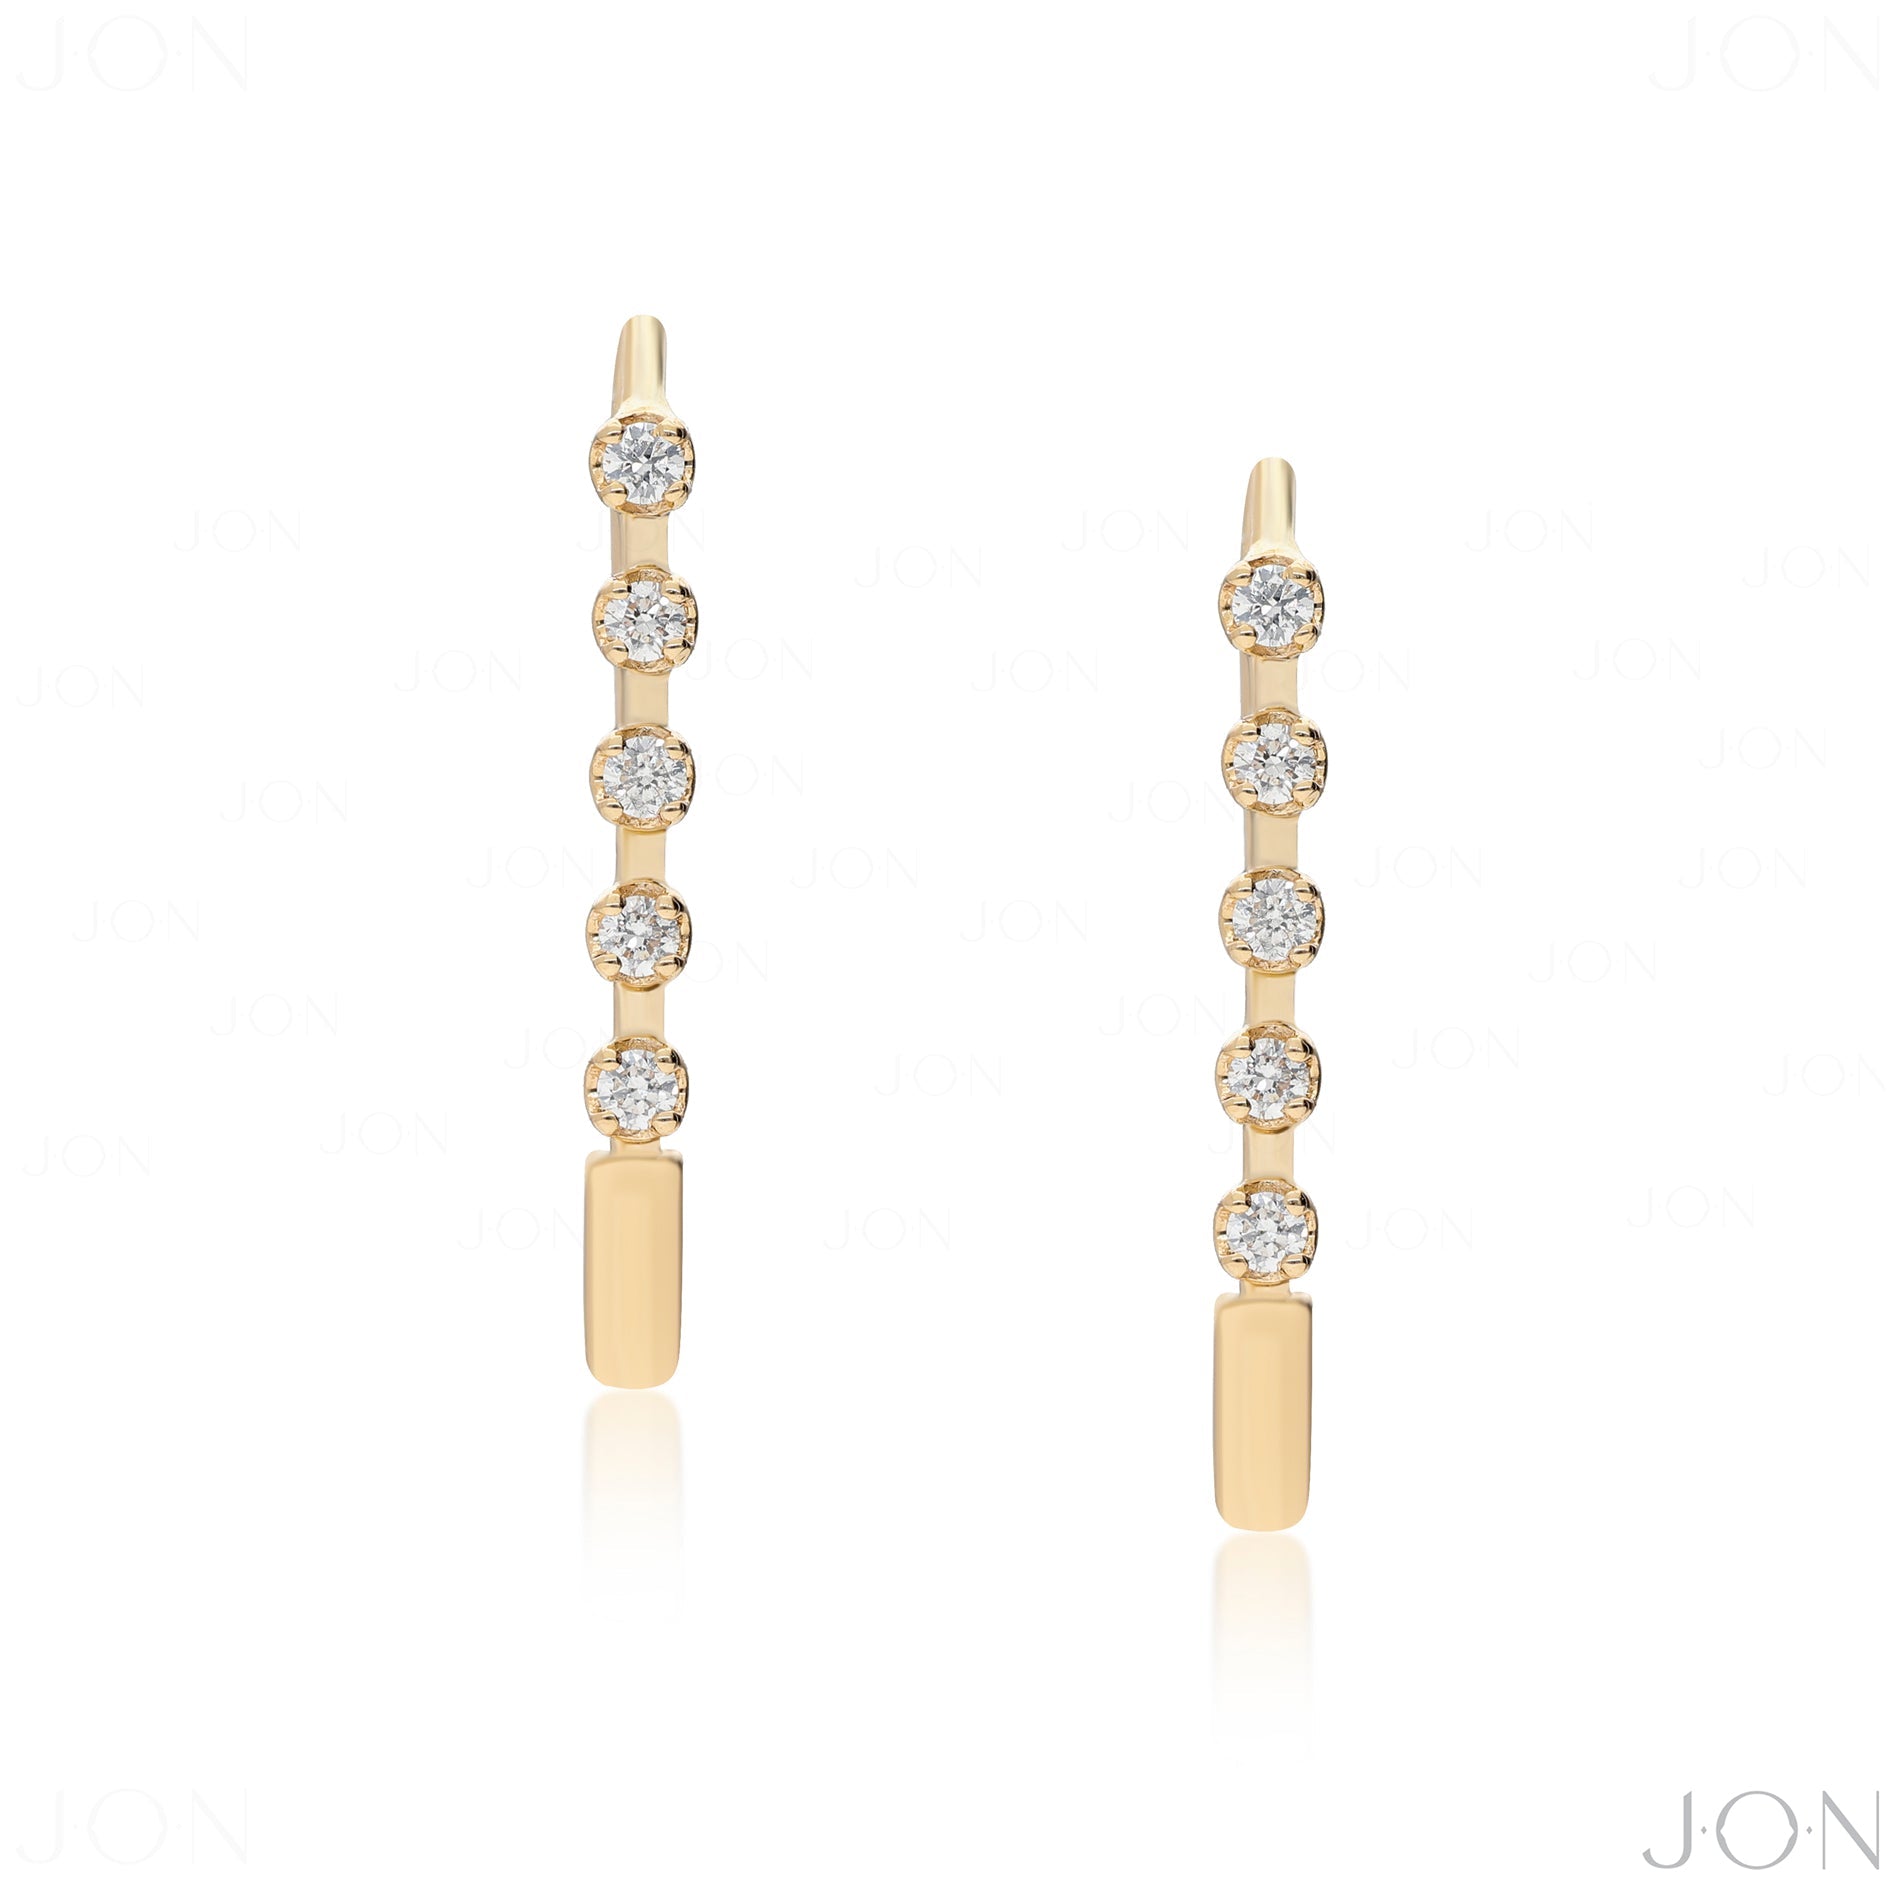 Safety Pin Earrings - The Jewelz 